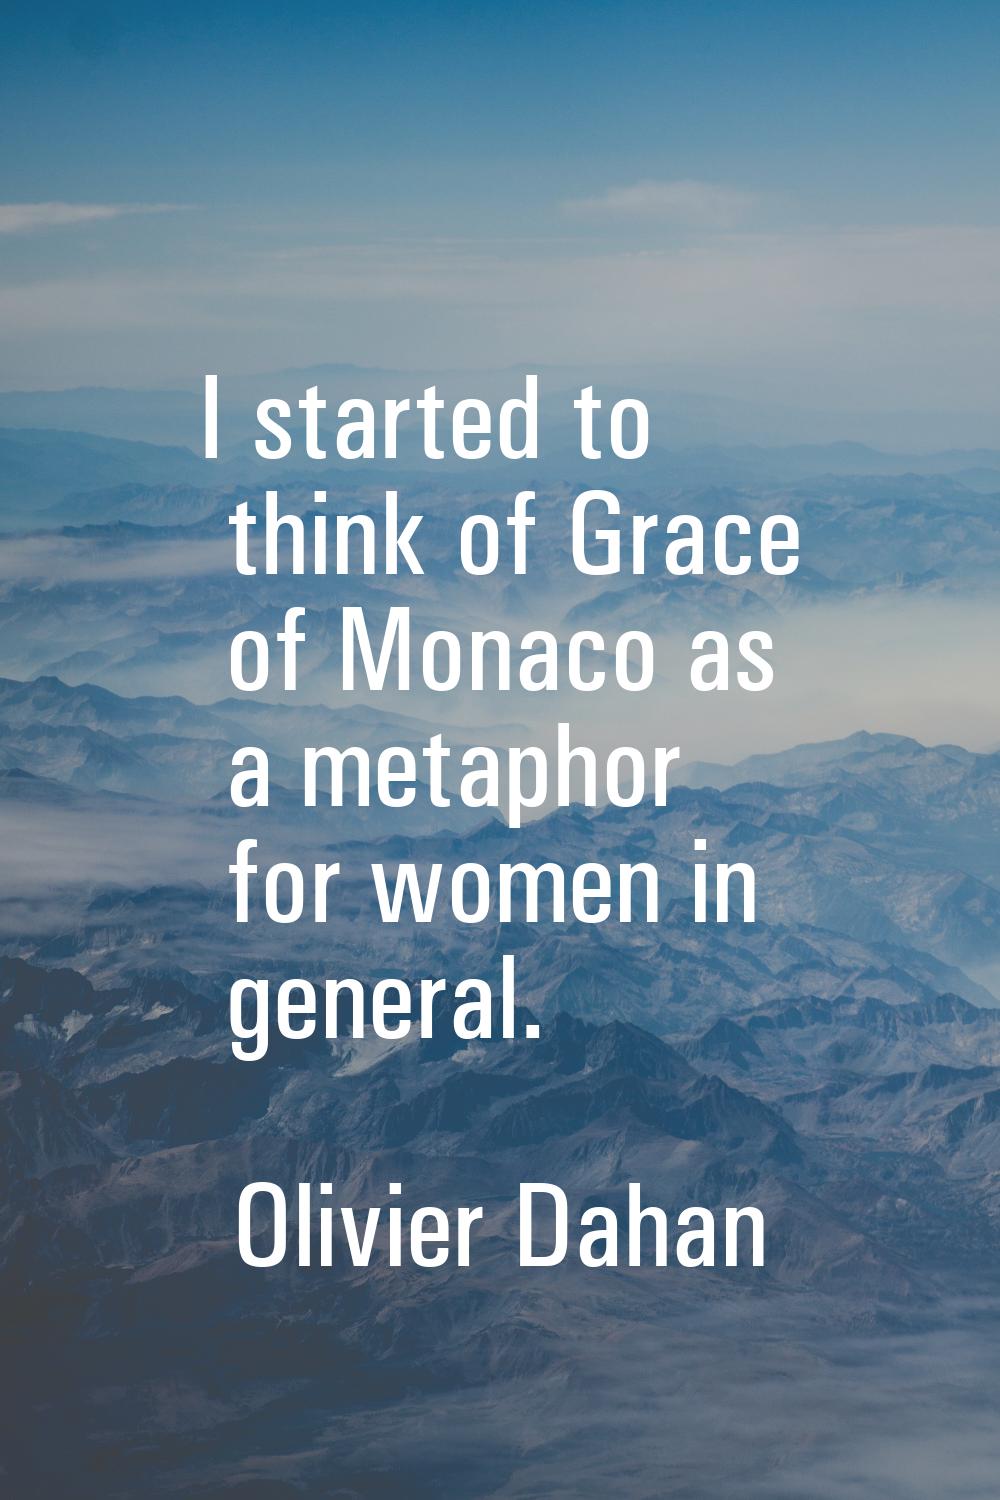 I started to think of Grace of Monaco as a metaphor for women in general.